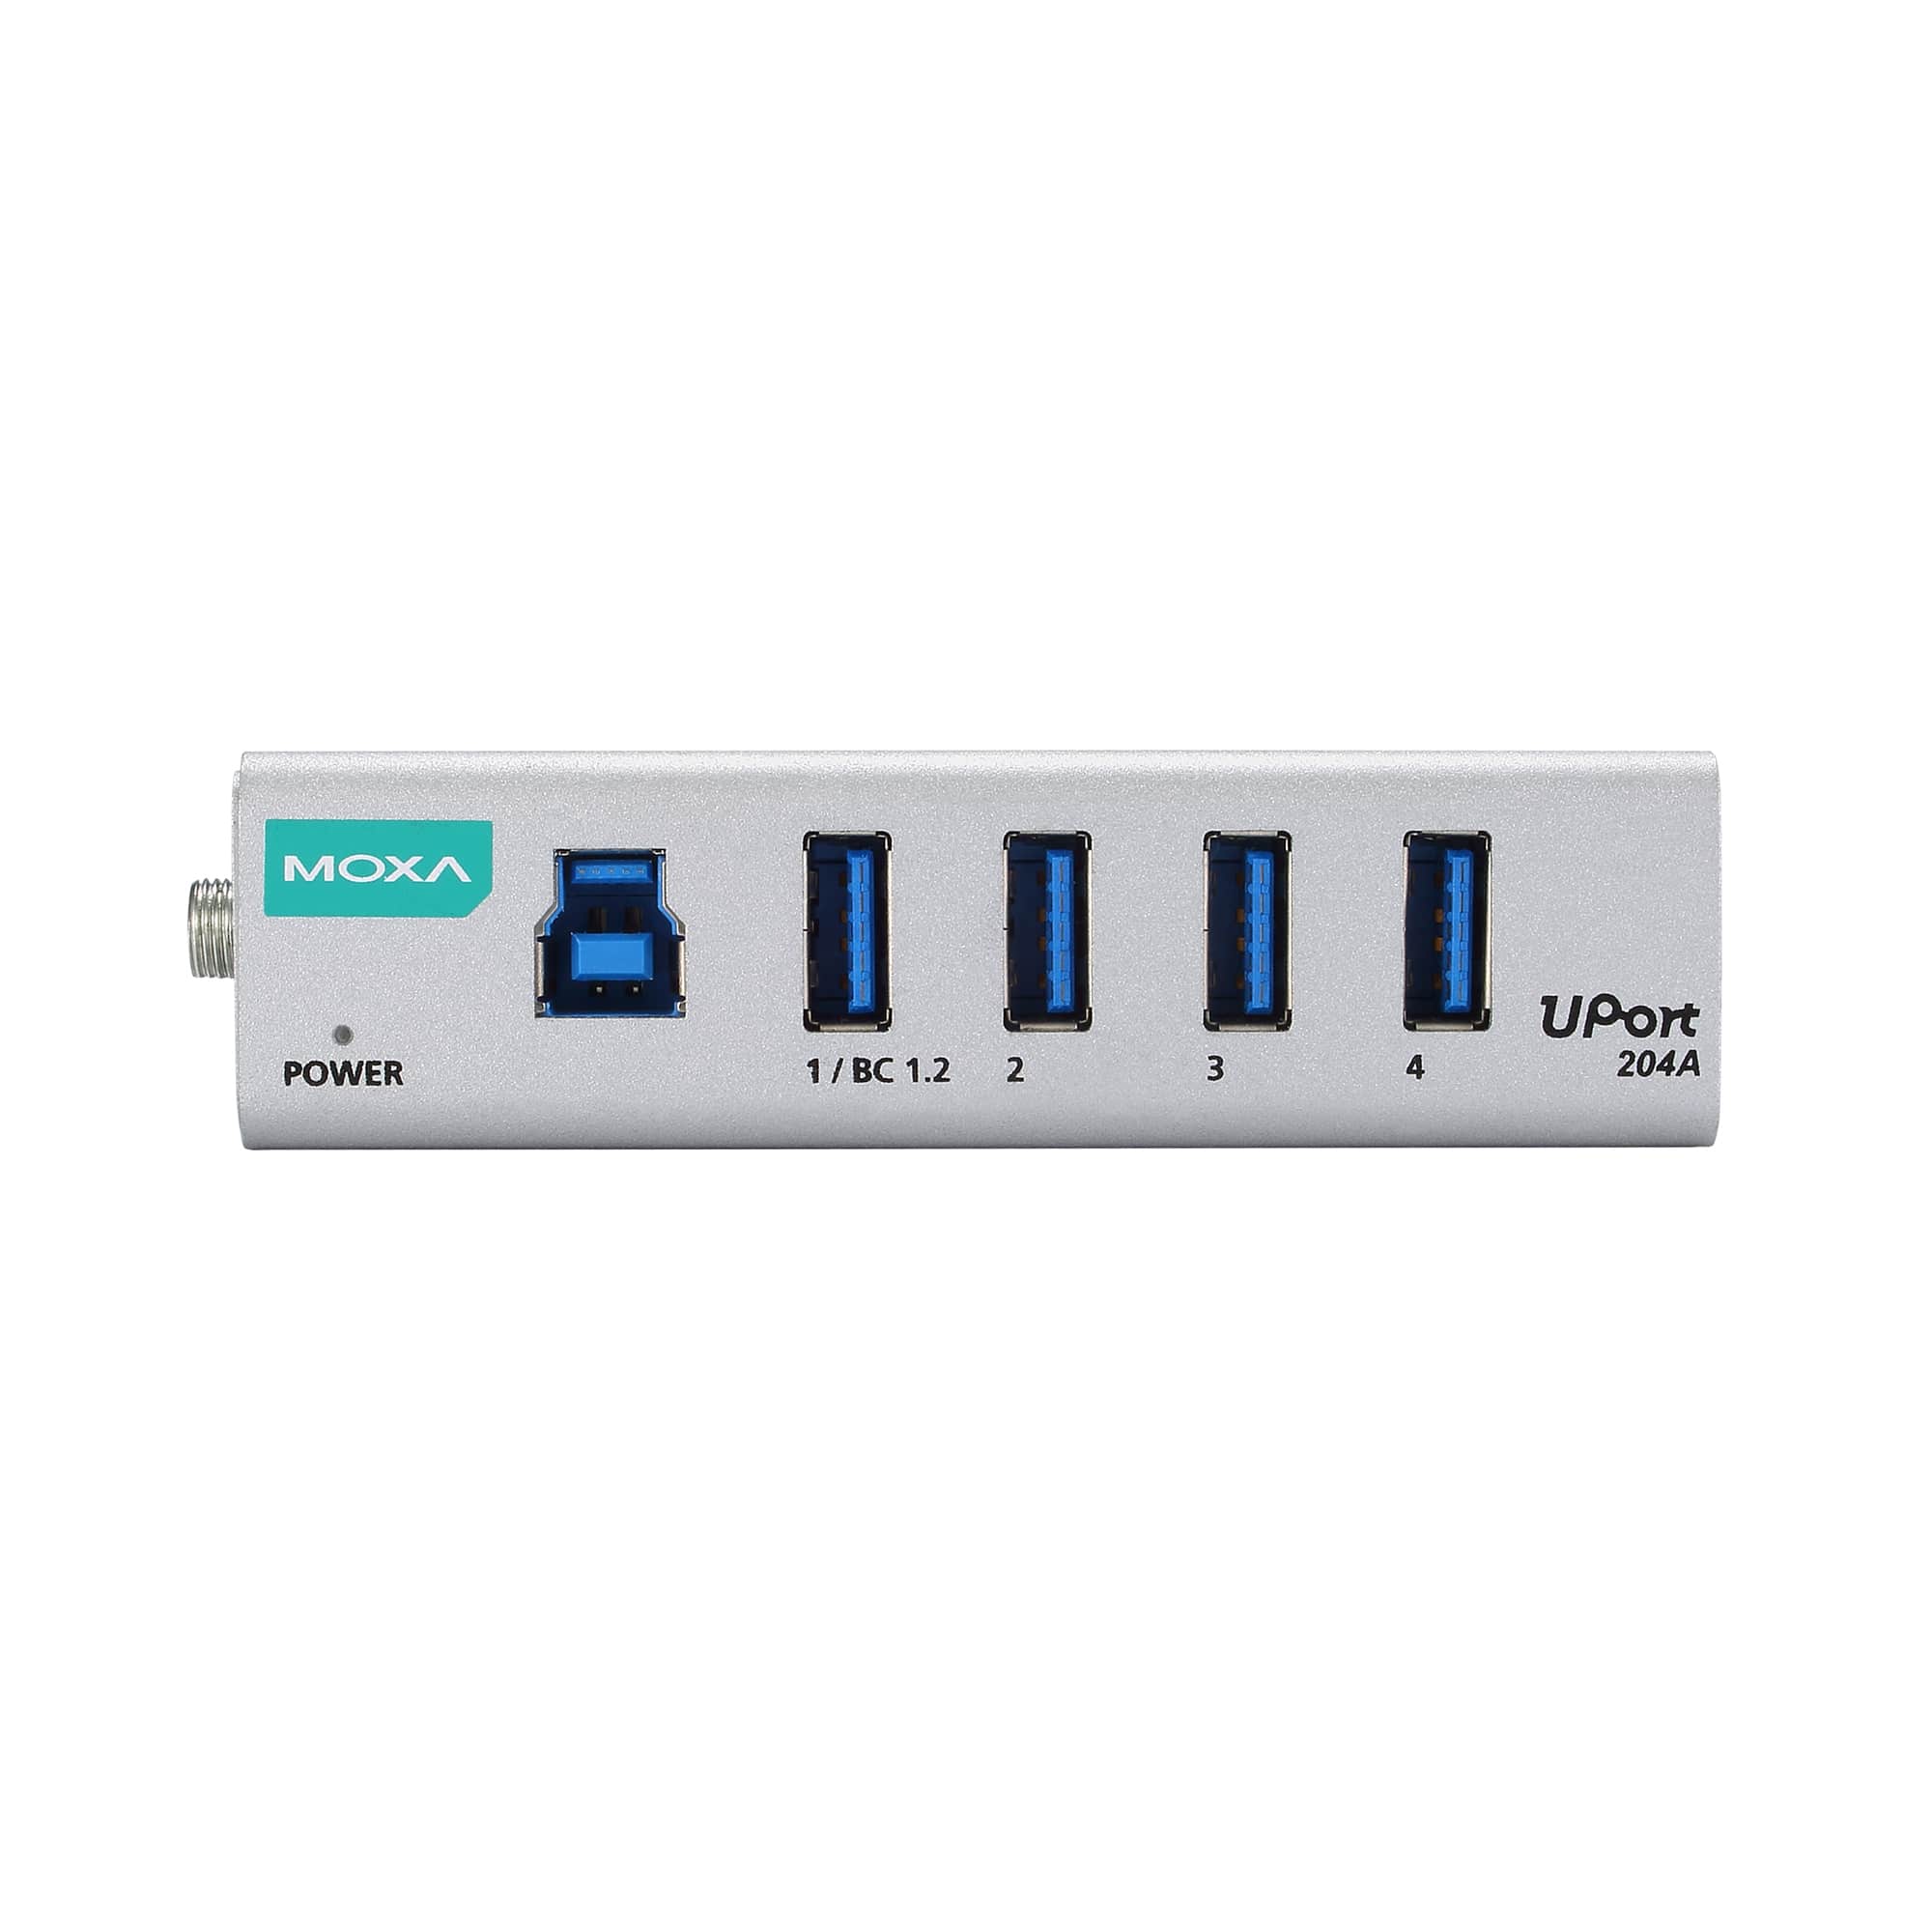 Хаб USB UPort 204A